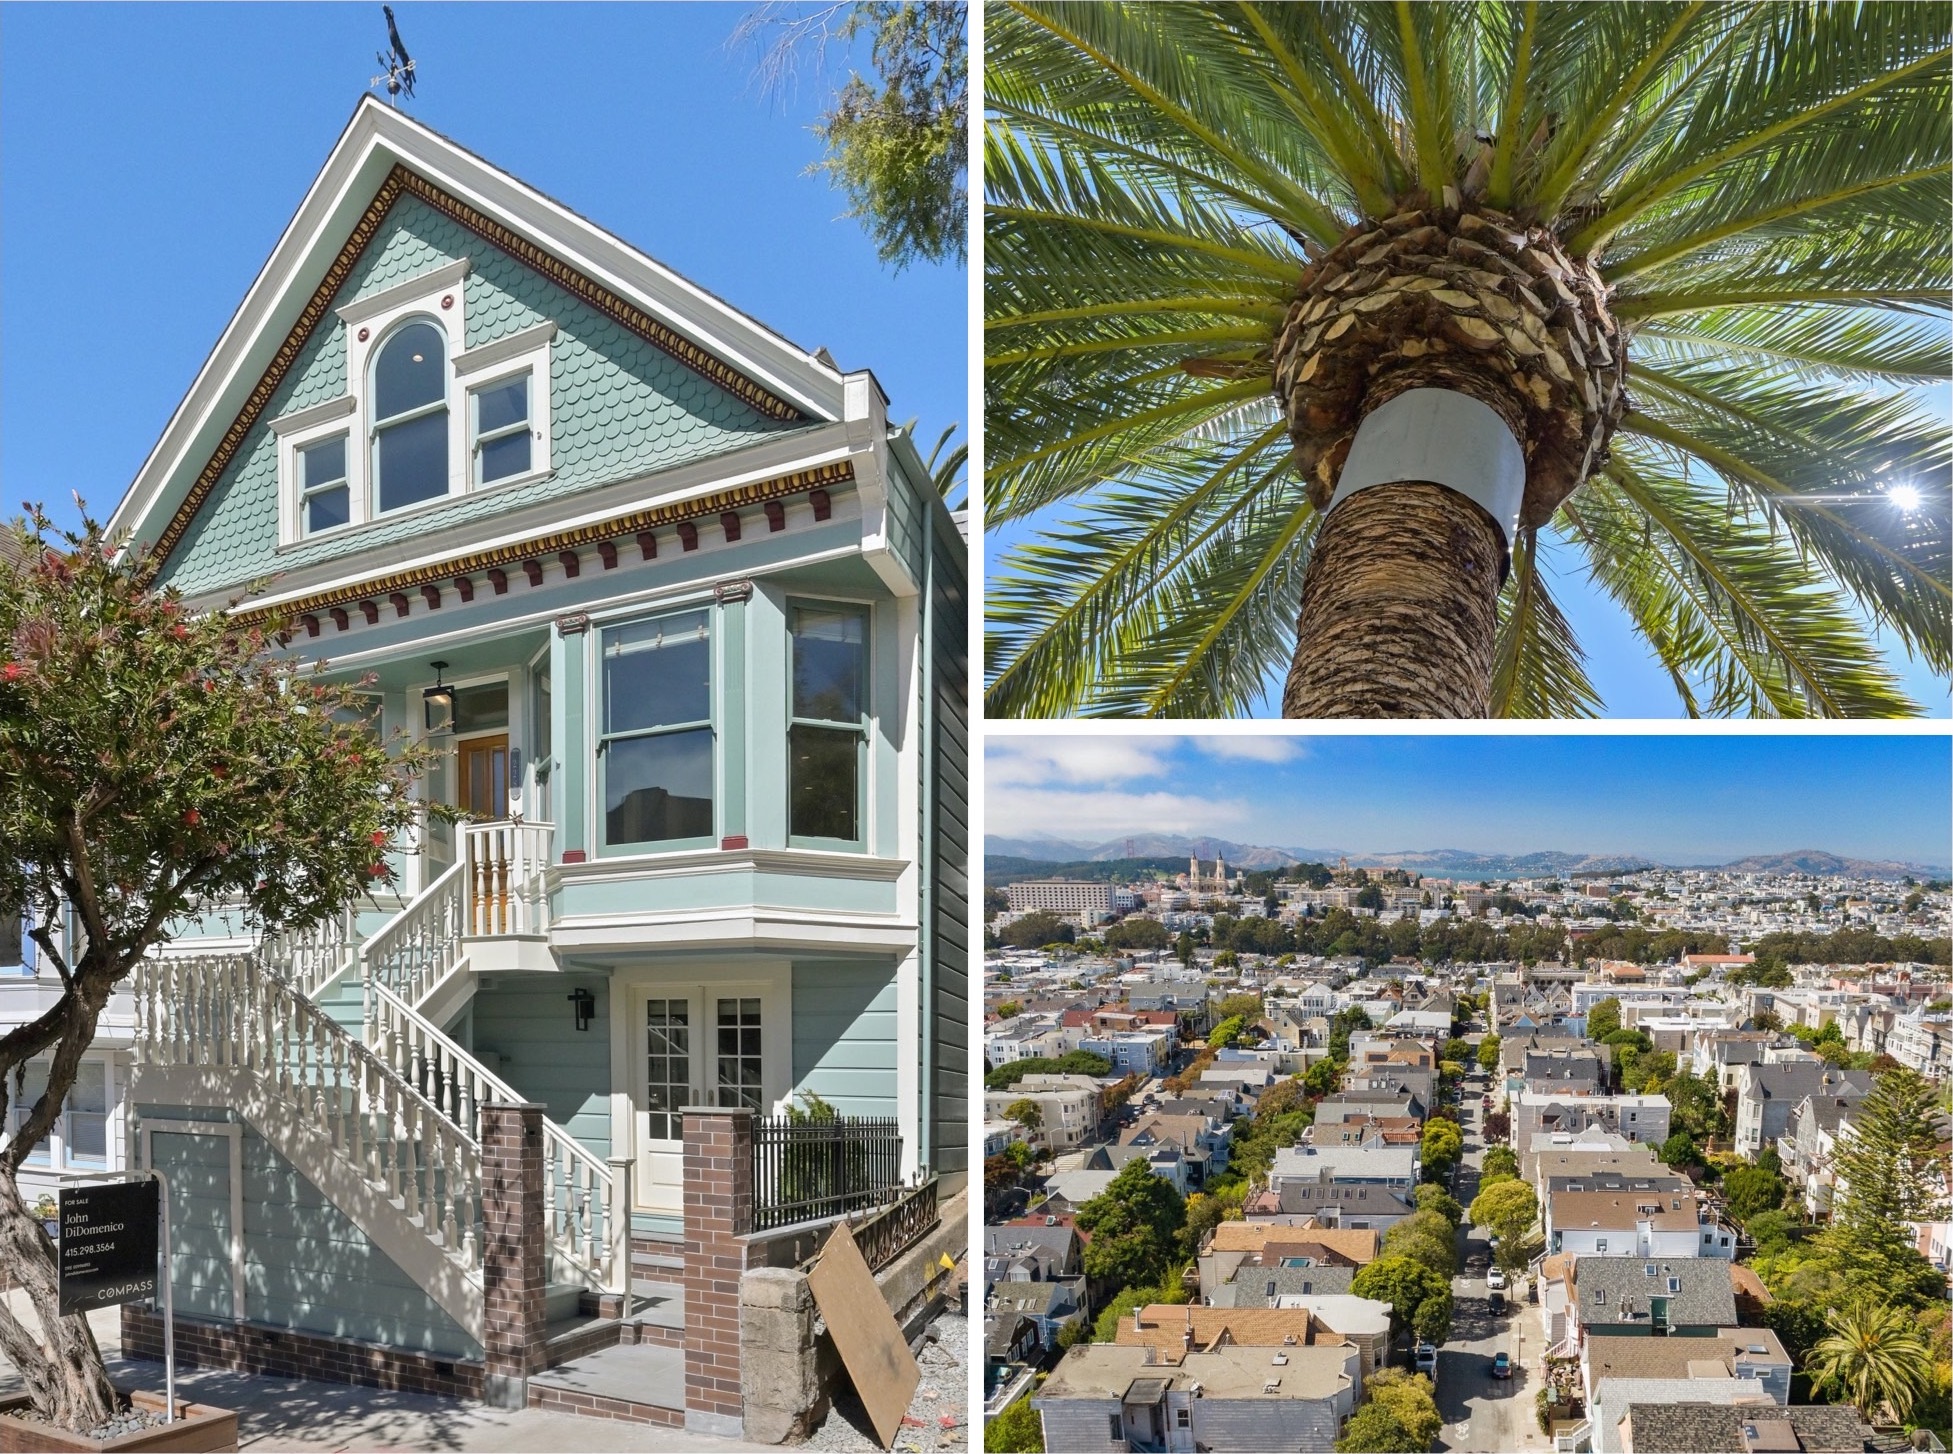 Image collage showing a two-story Victorian home, palm tree, and the Ashbury Heights neighborhood